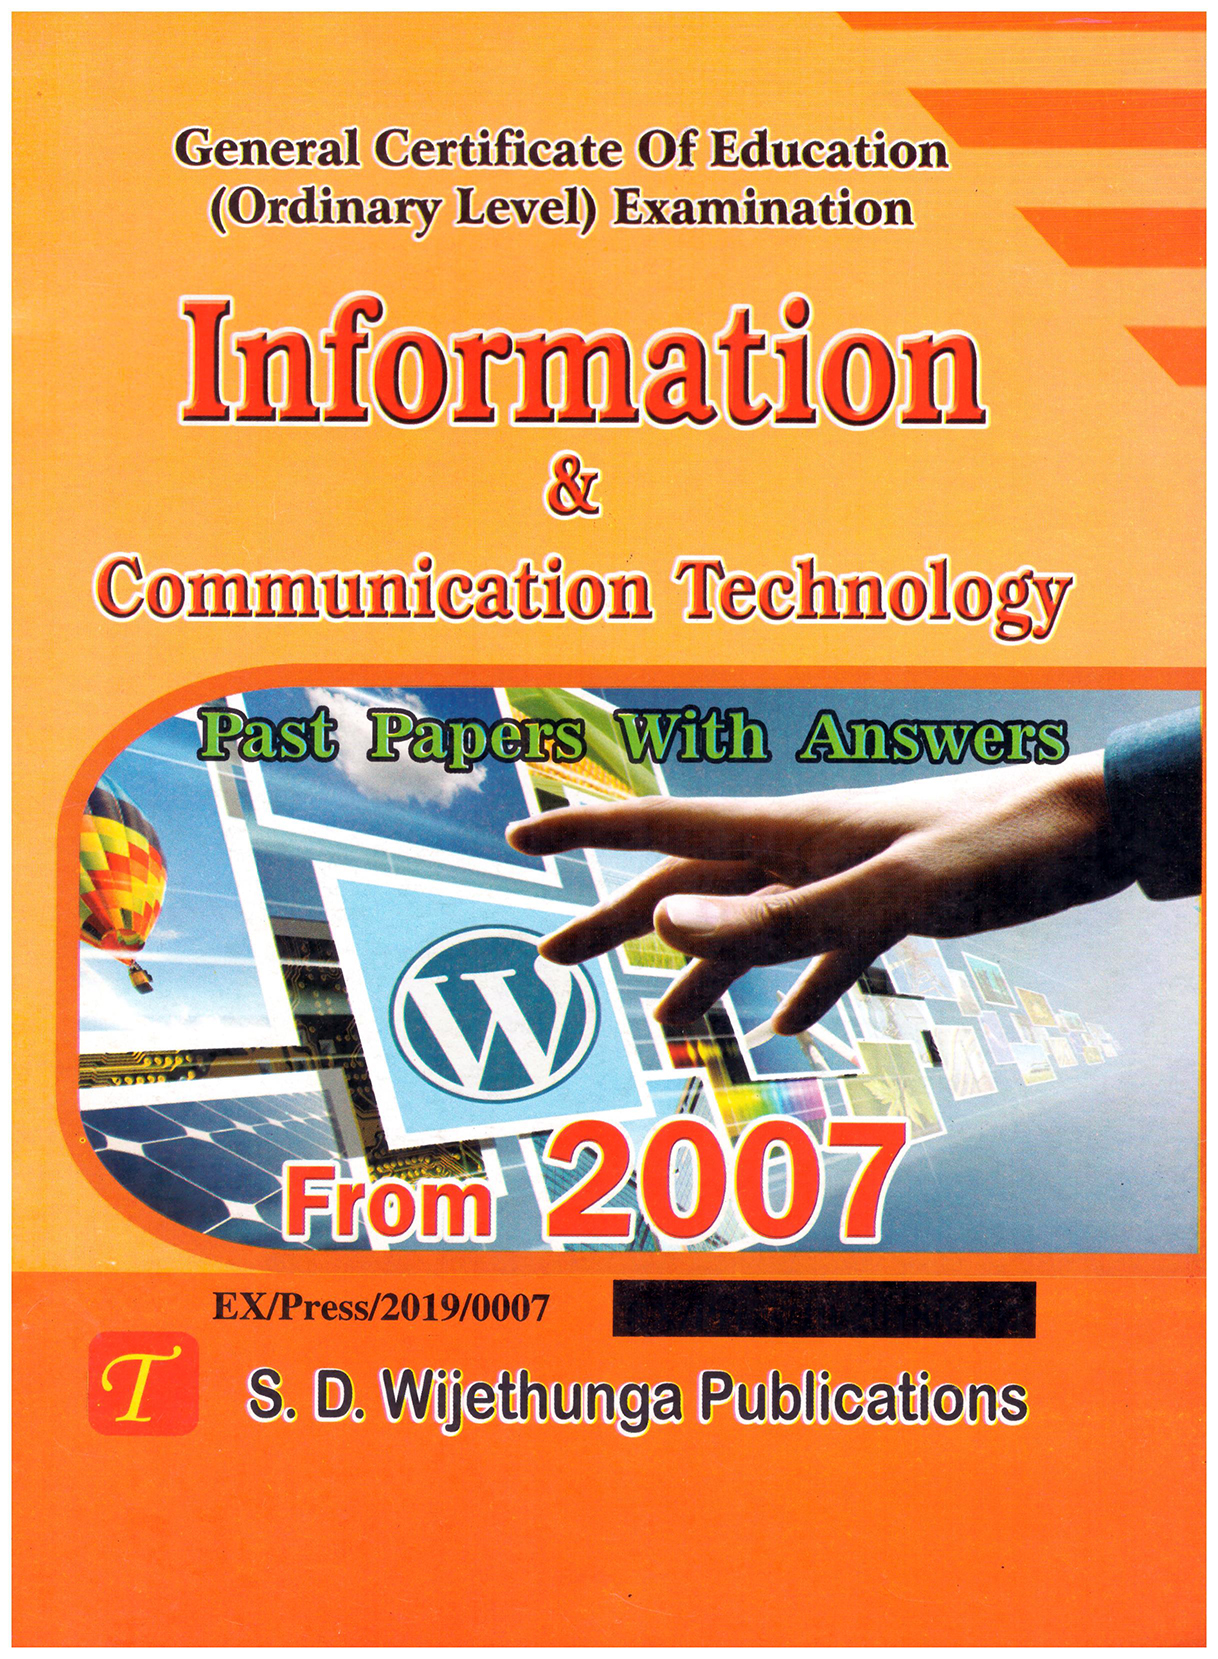 G.C.E O/L Information and Communication Technology Past Paper with Answer From 2007 - 2019 (English Medium)